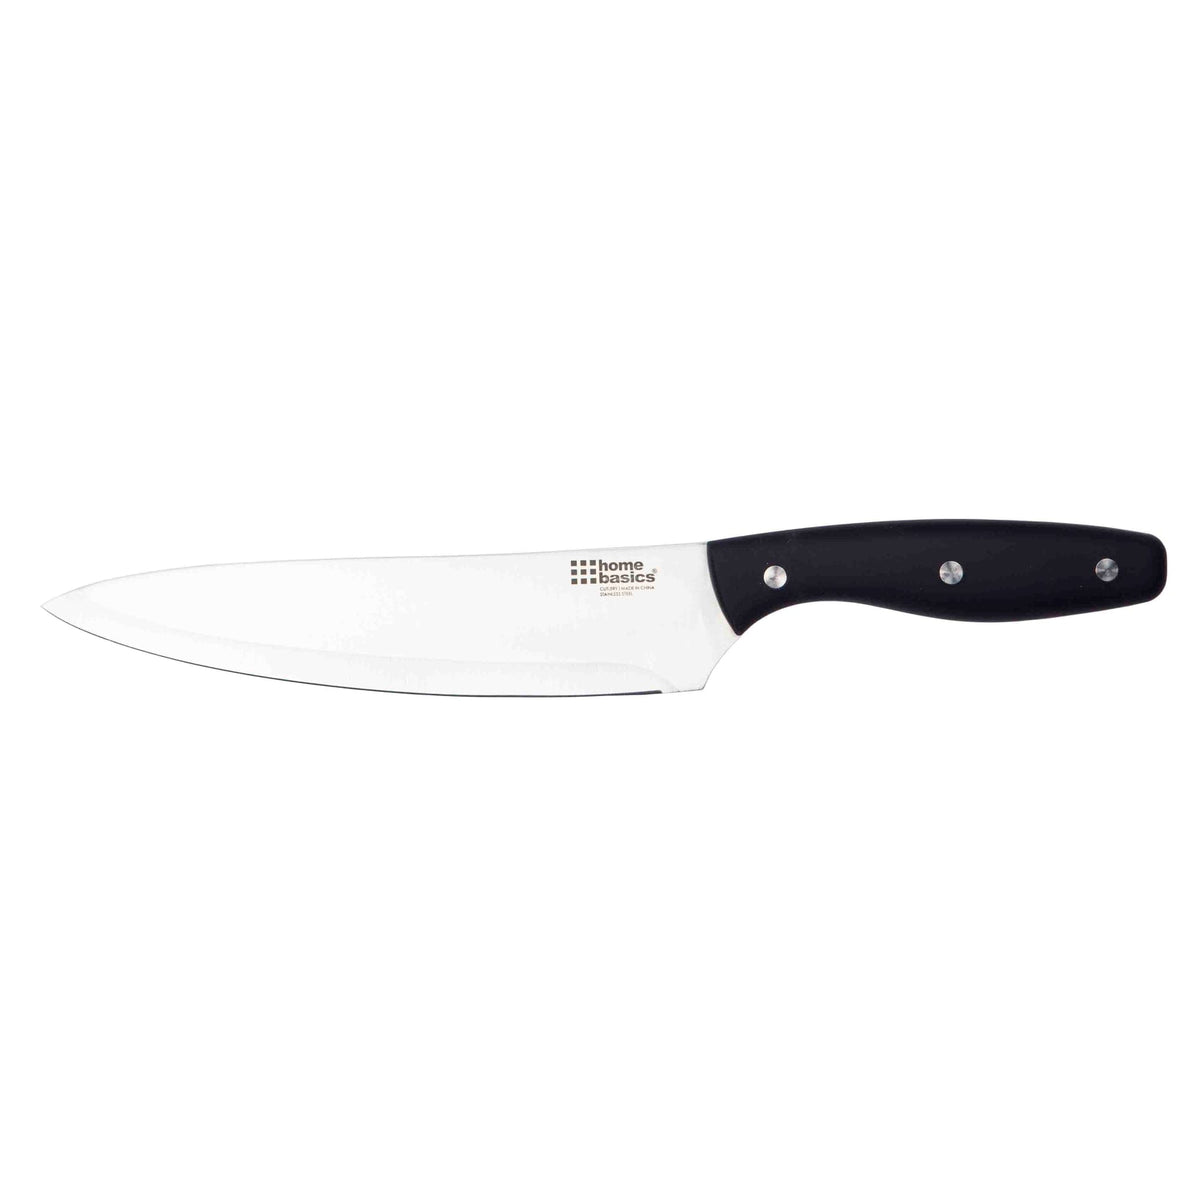 Home Basics 3.5 Stainless Steel Paring Knife with Soft Grip